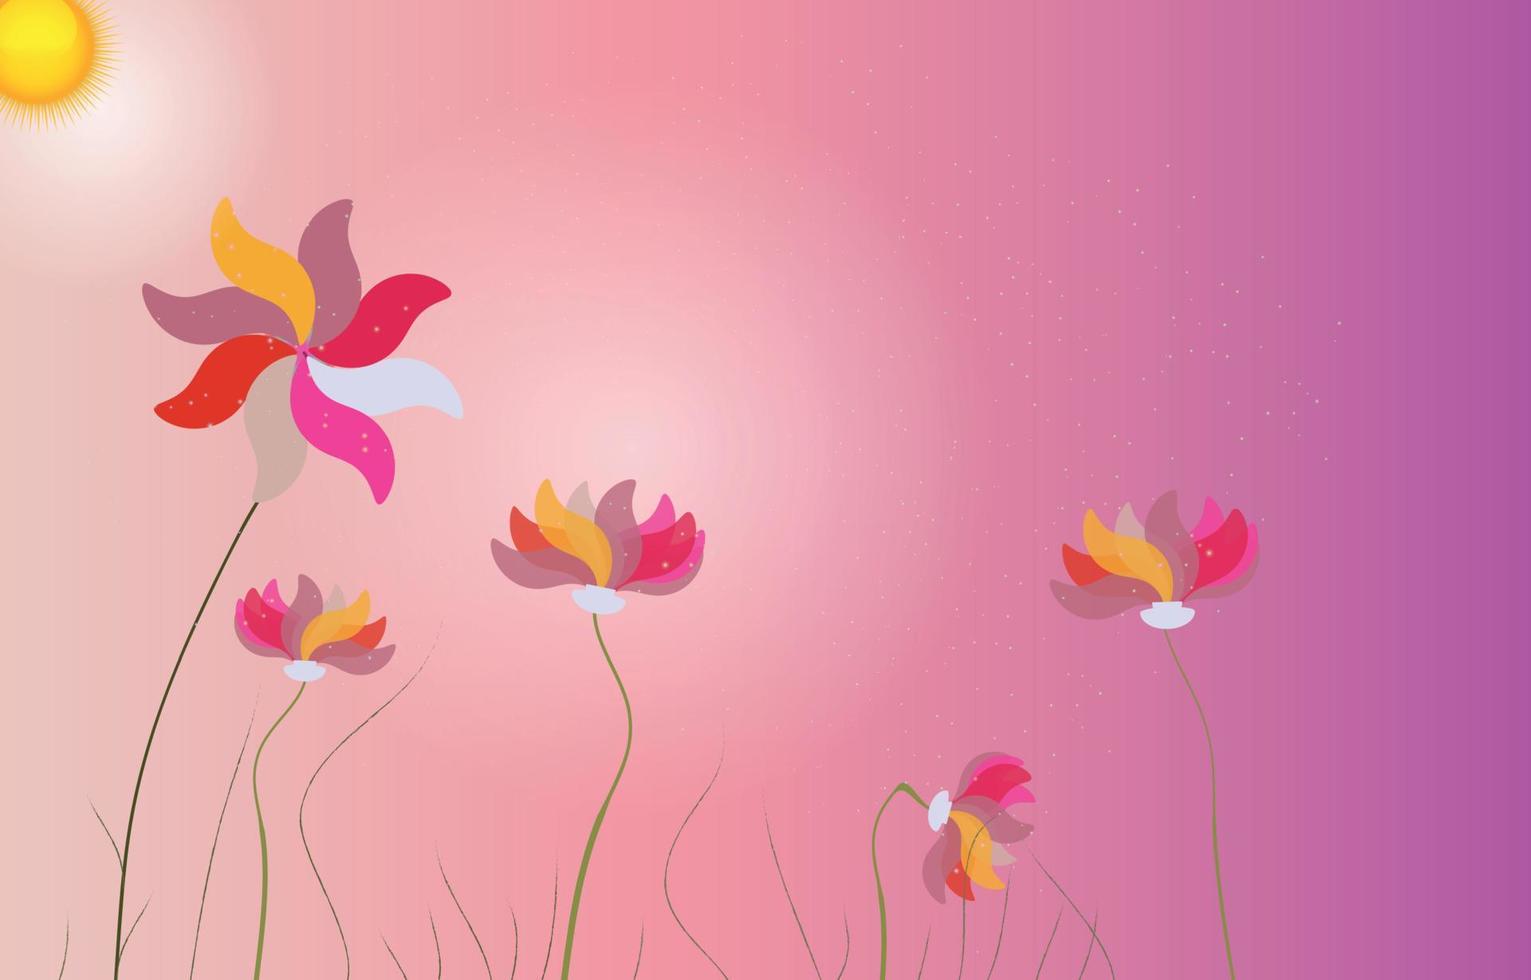 Abstract Colorful Background with Flowers. Vector Illustration